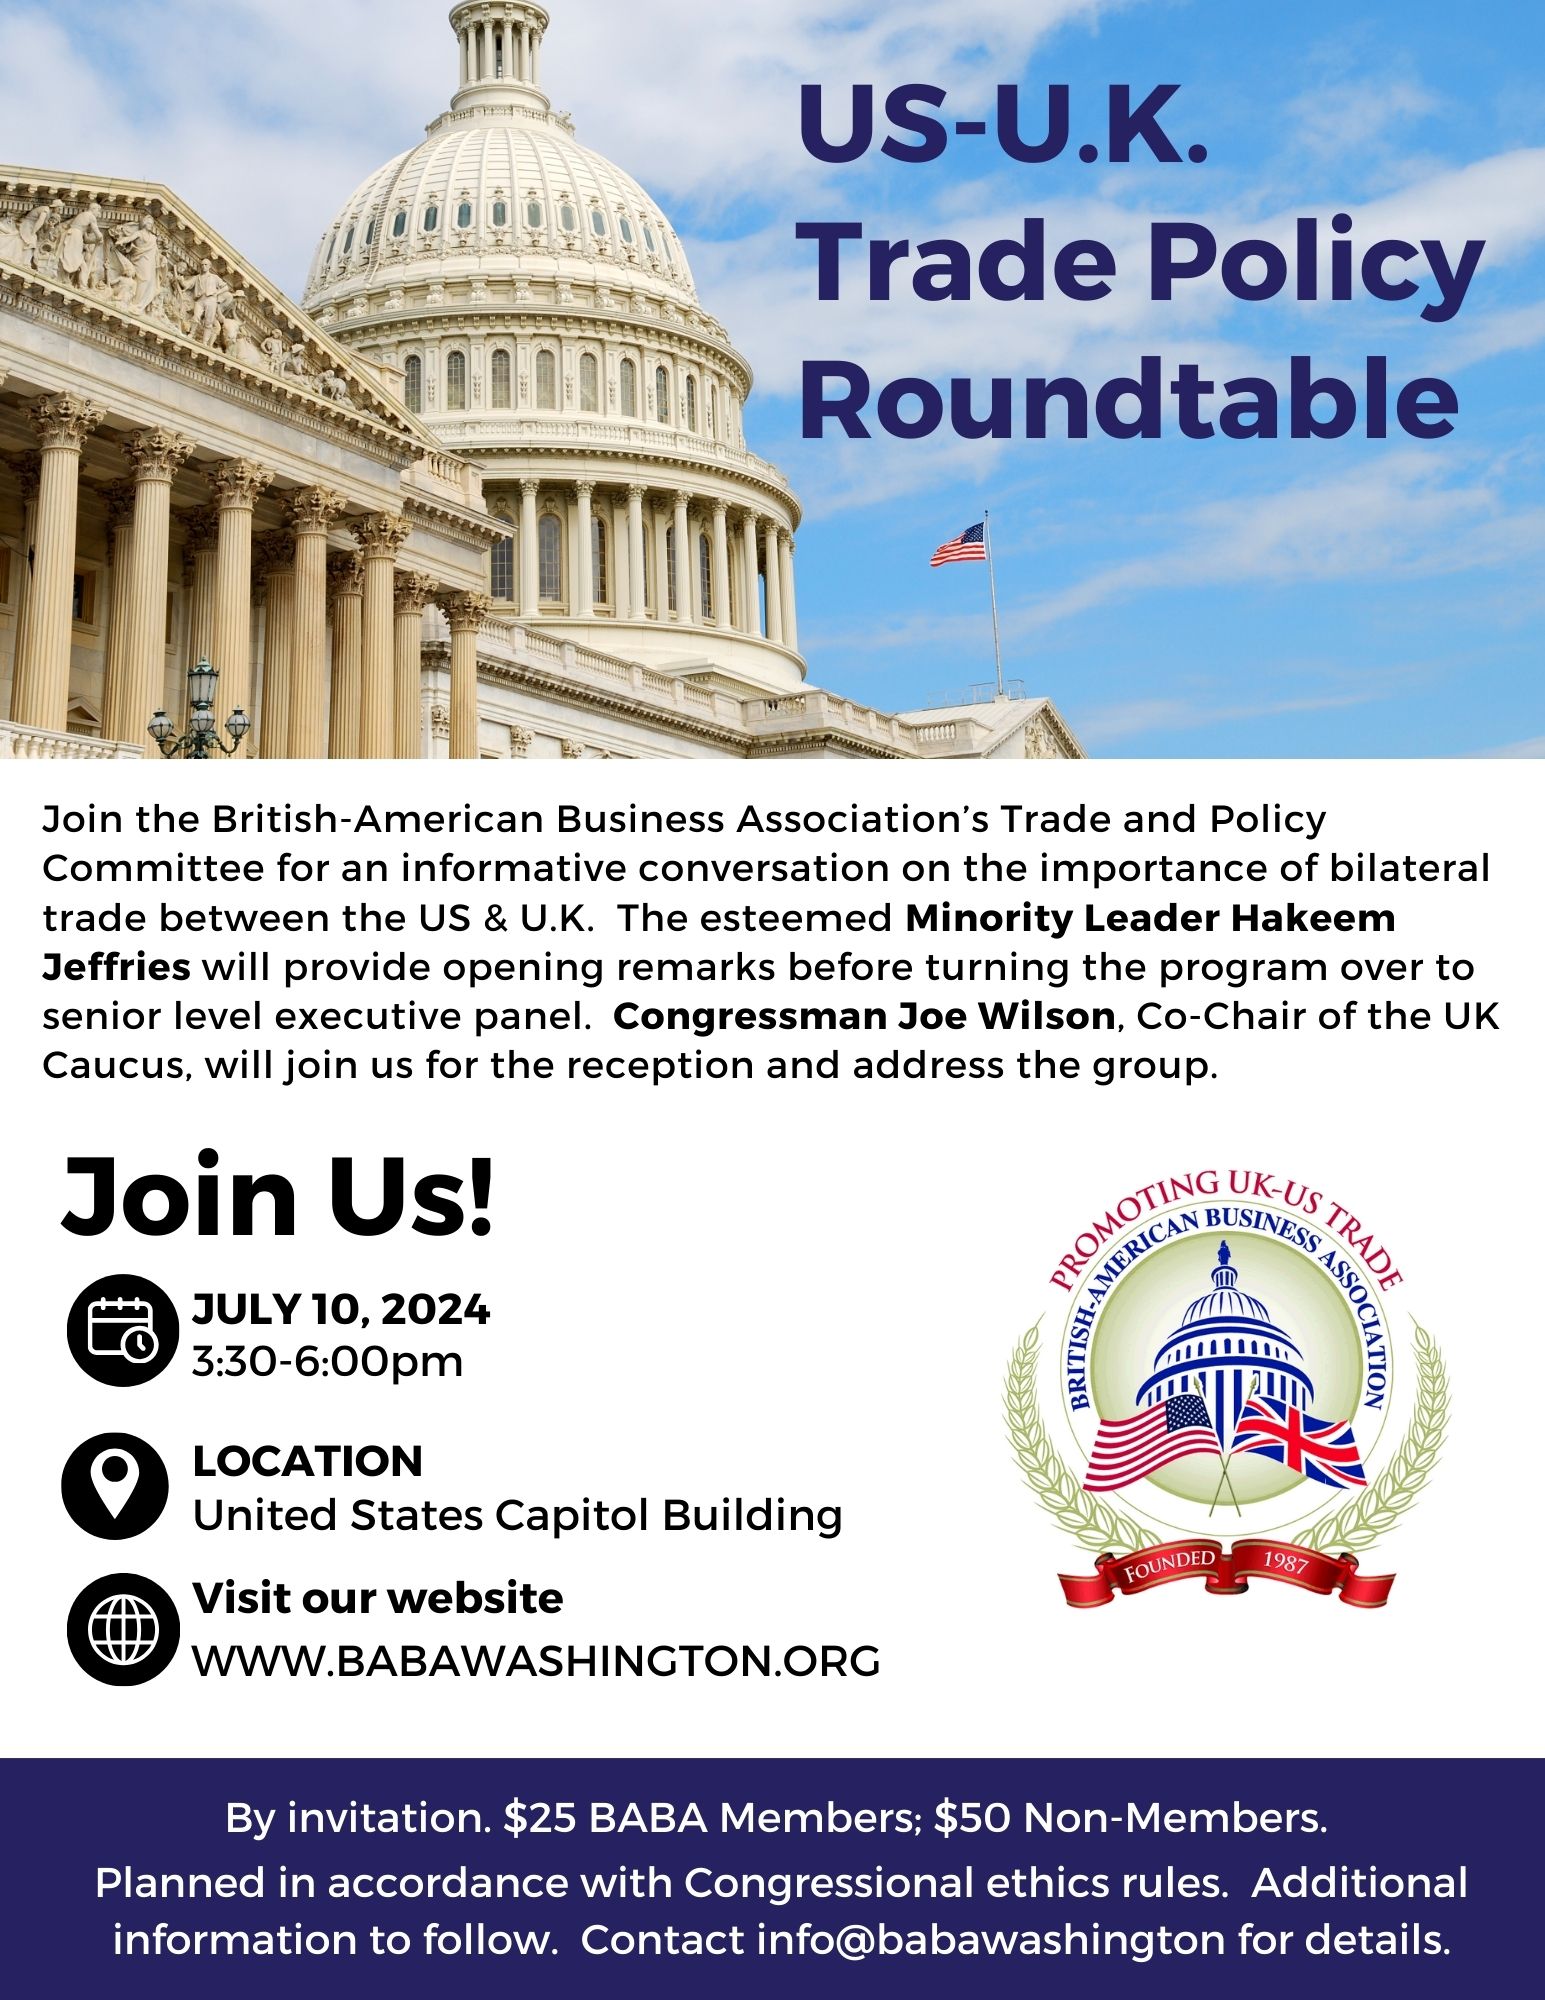 US-UK Trade Policy Roundtable